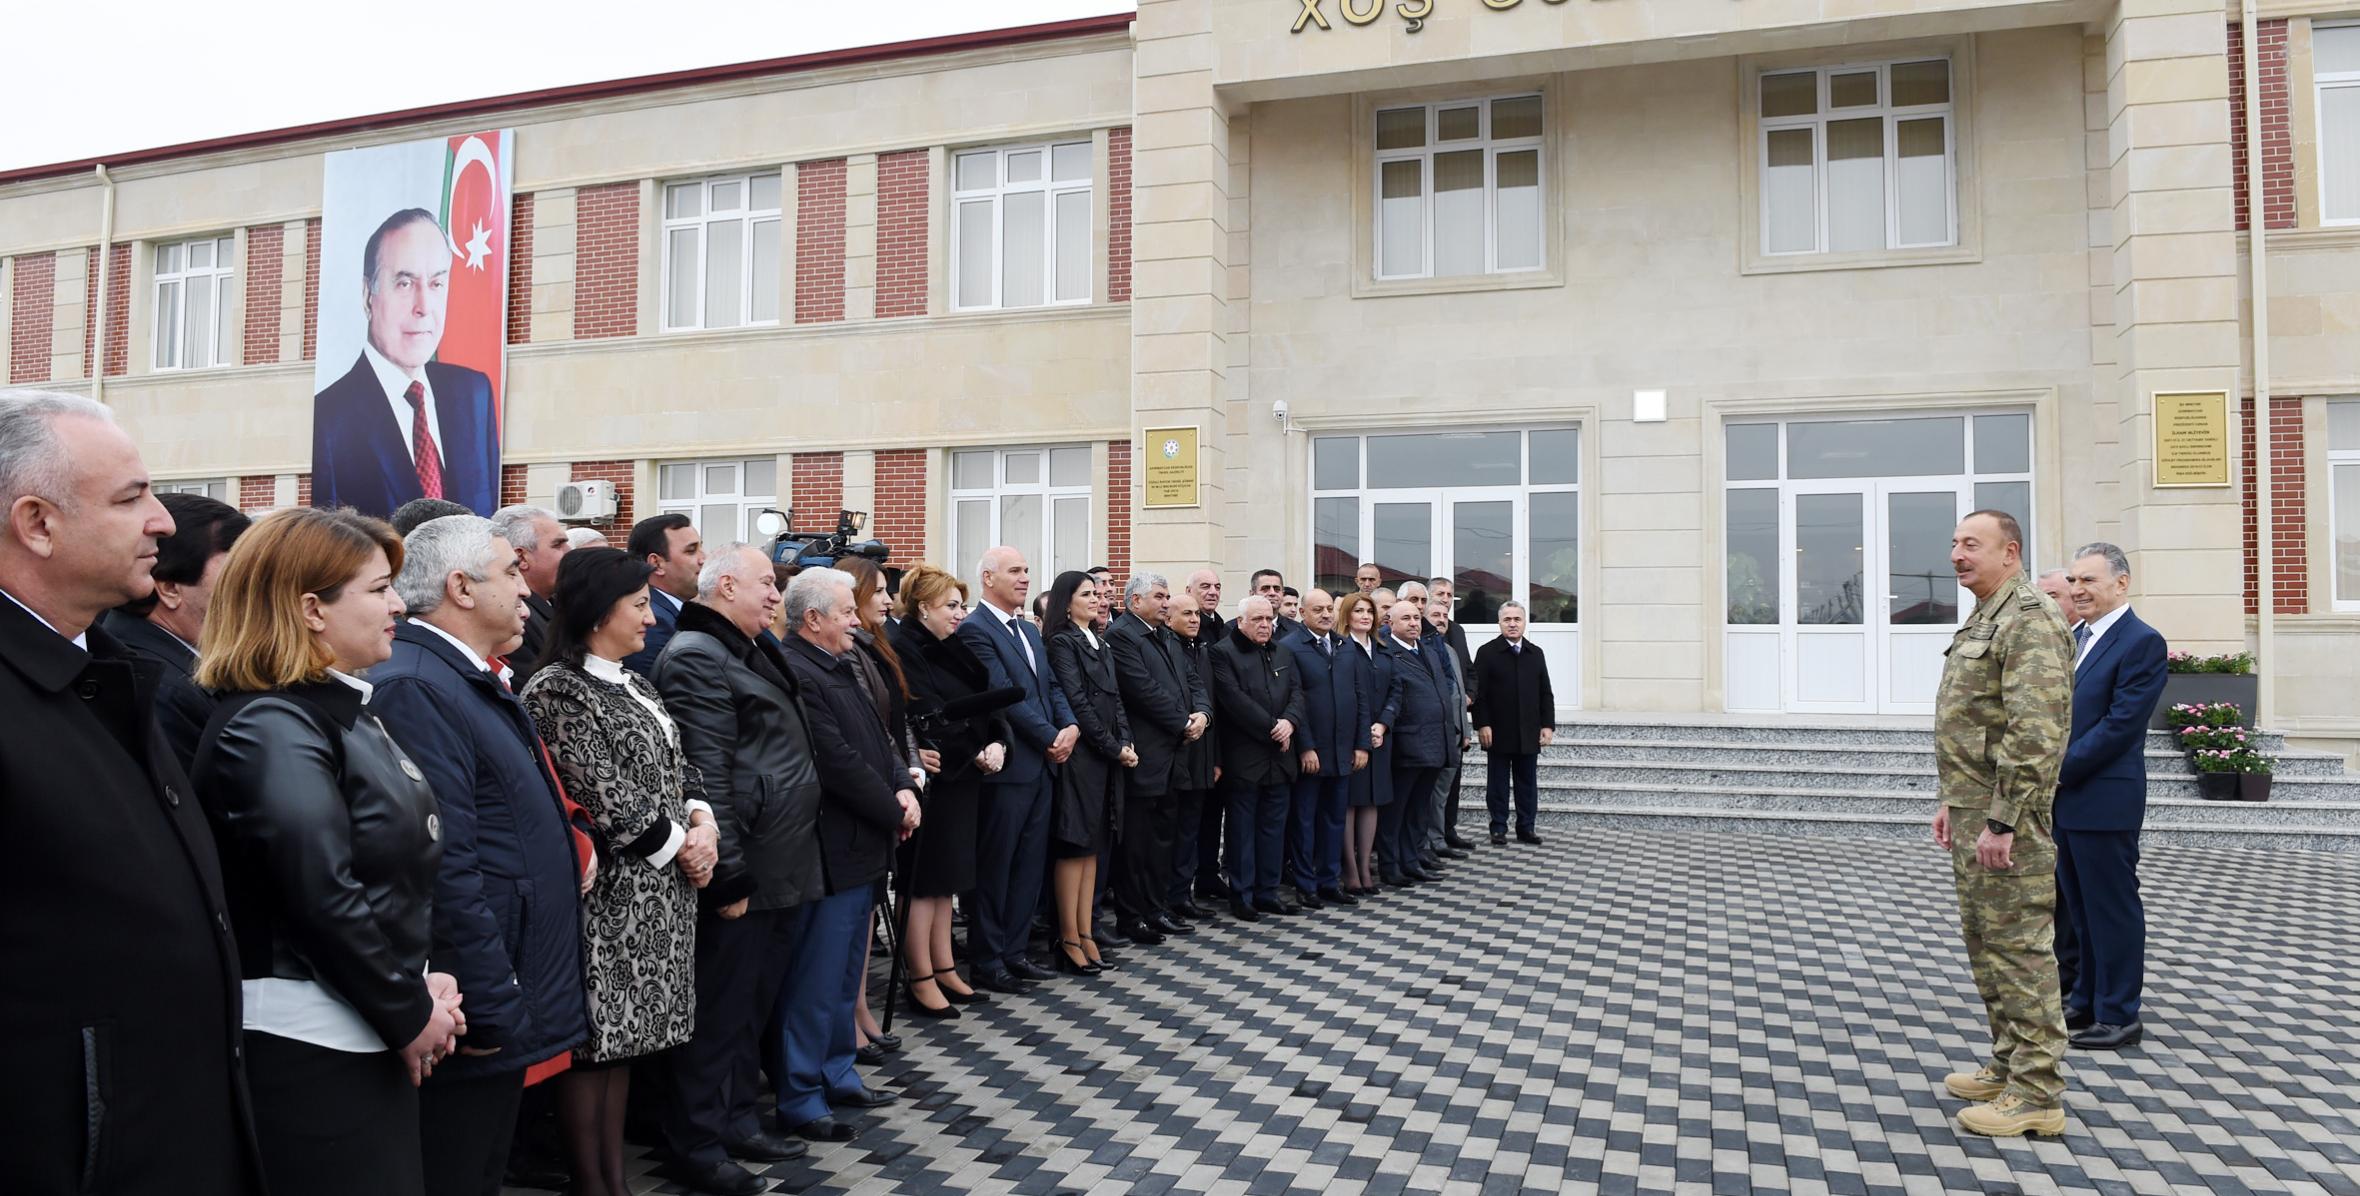 Speech by Ilham Aliyev during the visit of new residential settlement for IDPs in Fuzuli